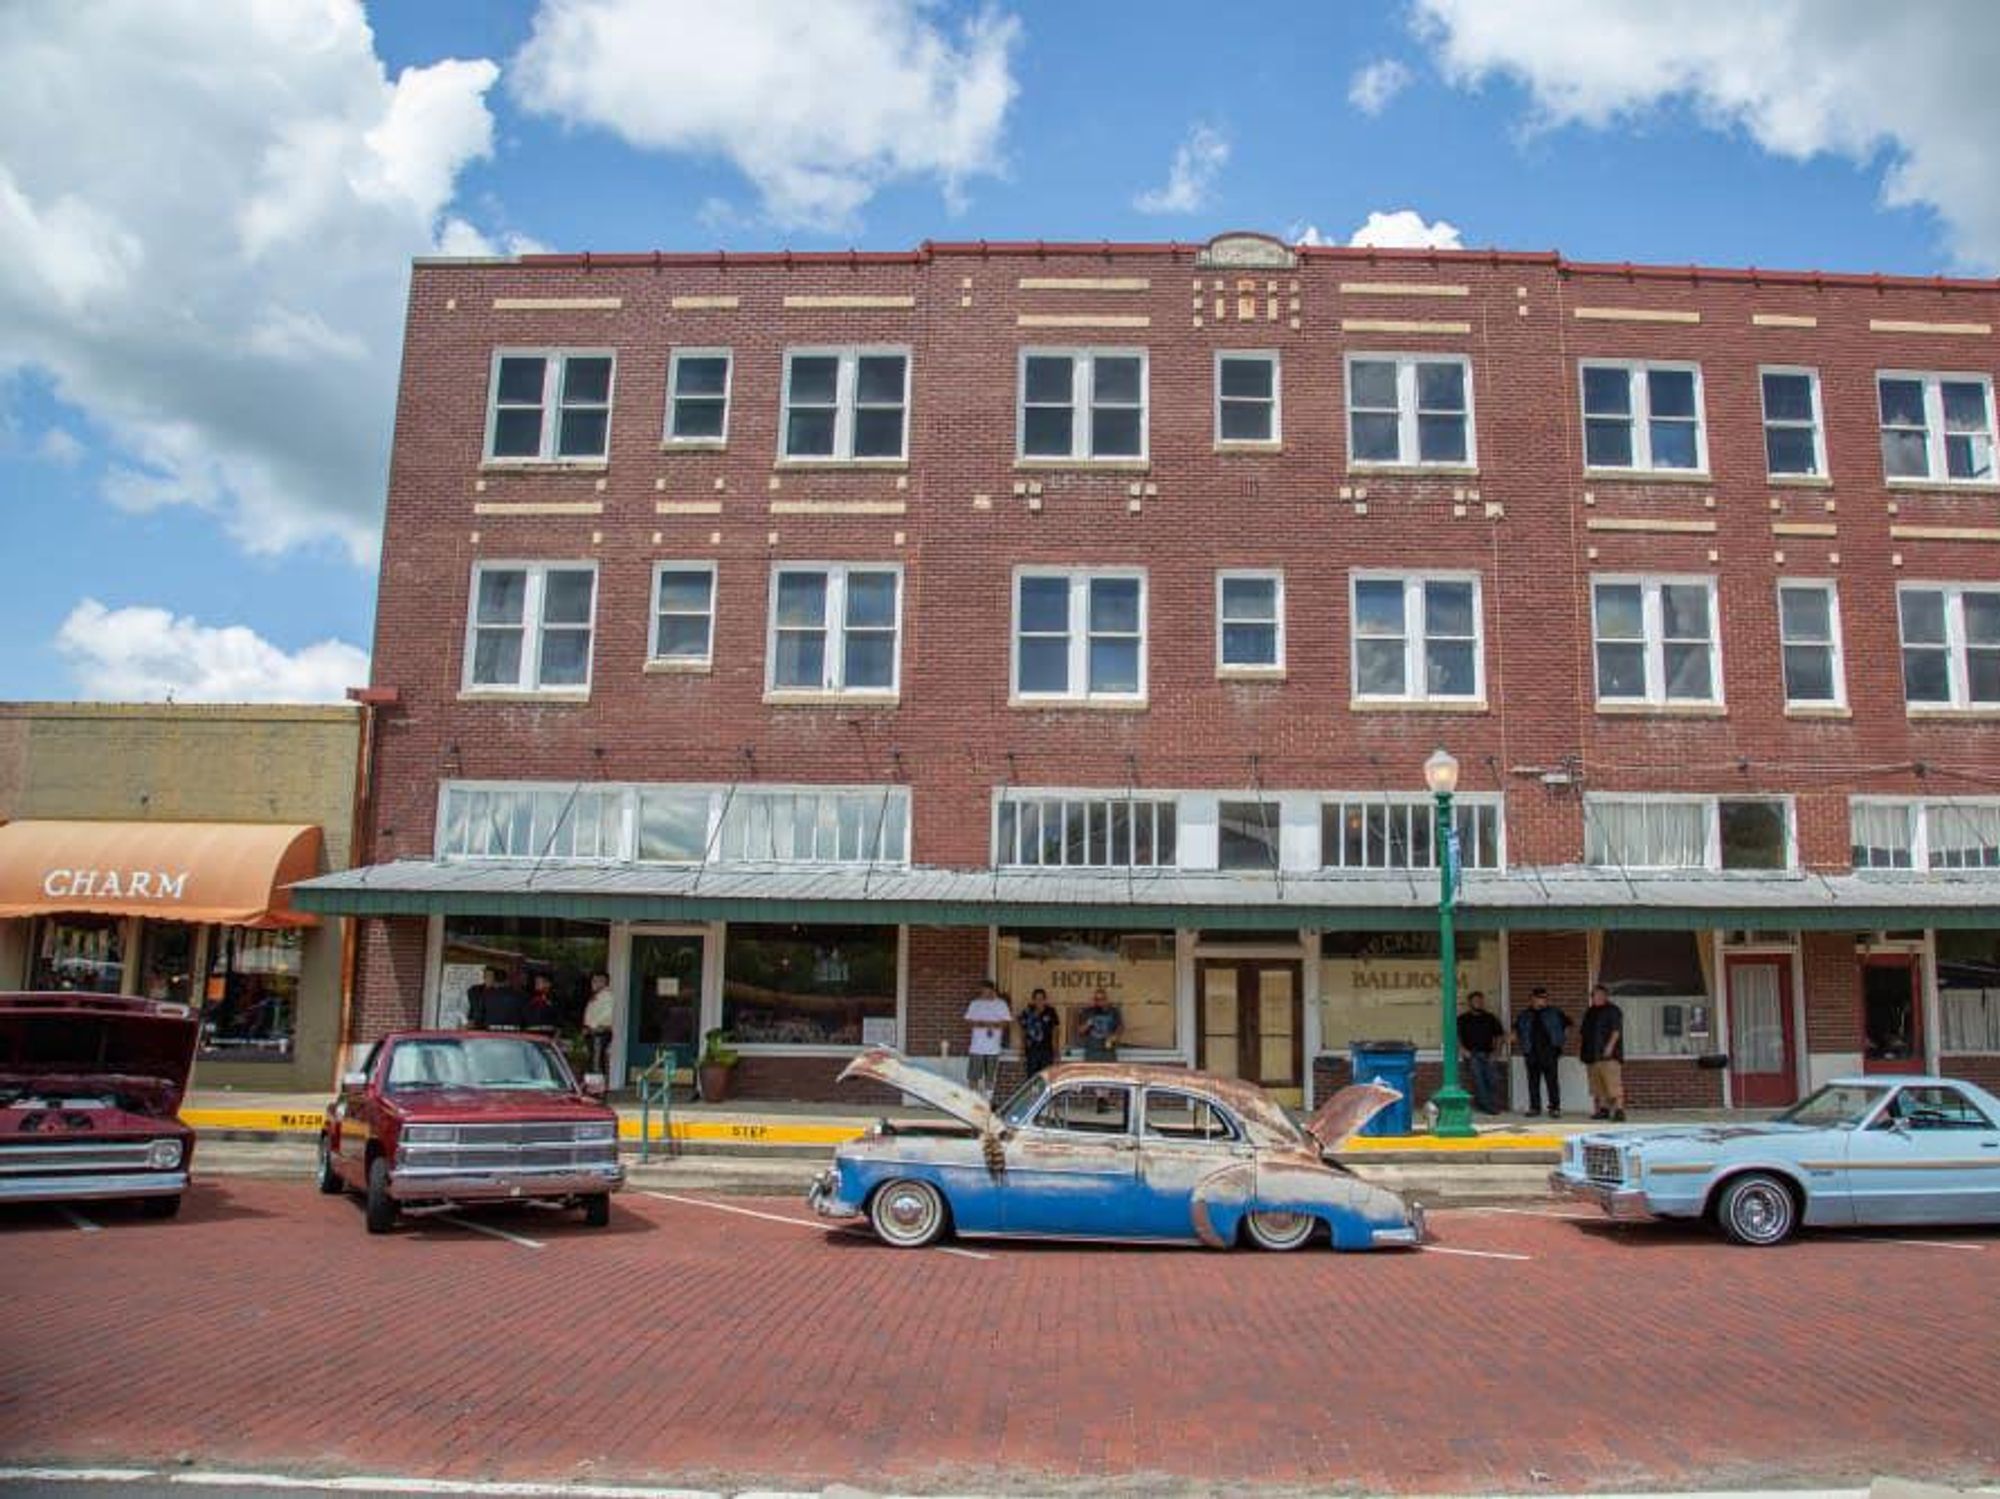 Wood County boasts charming, historic downtown districts.